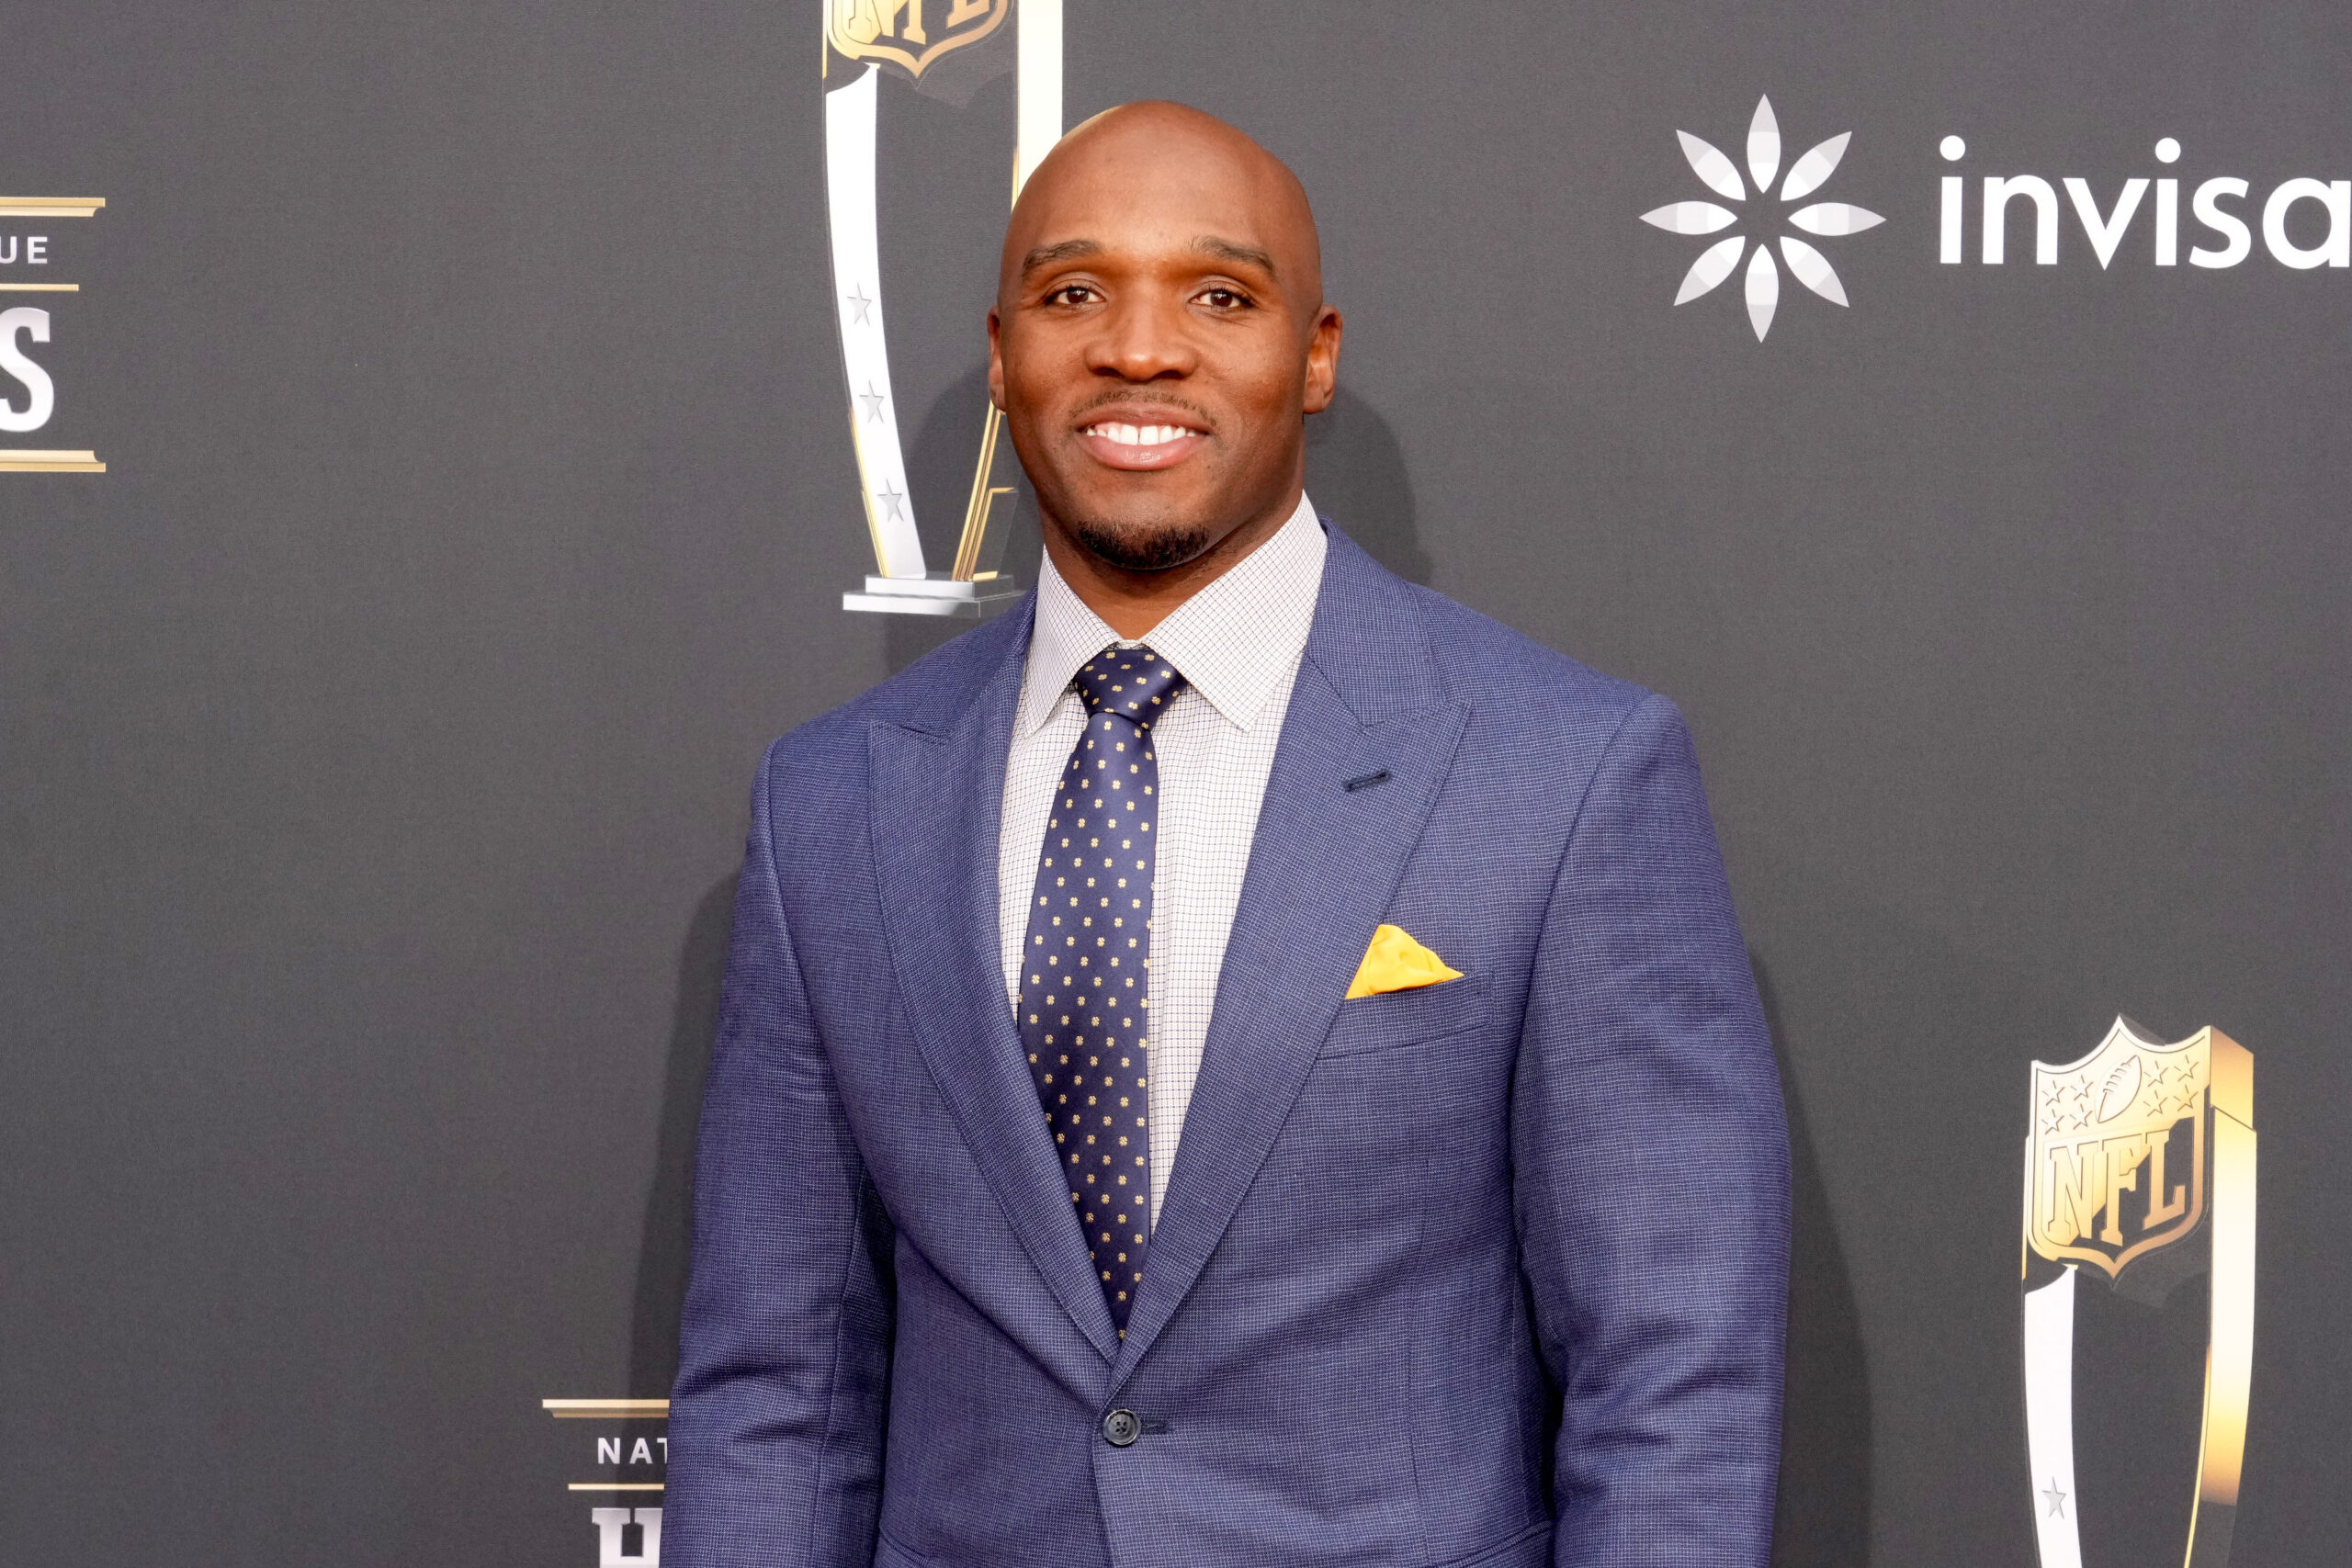 Who Is DeMeco Ryans' Wife? Everything We Know About Jamila Ryans 